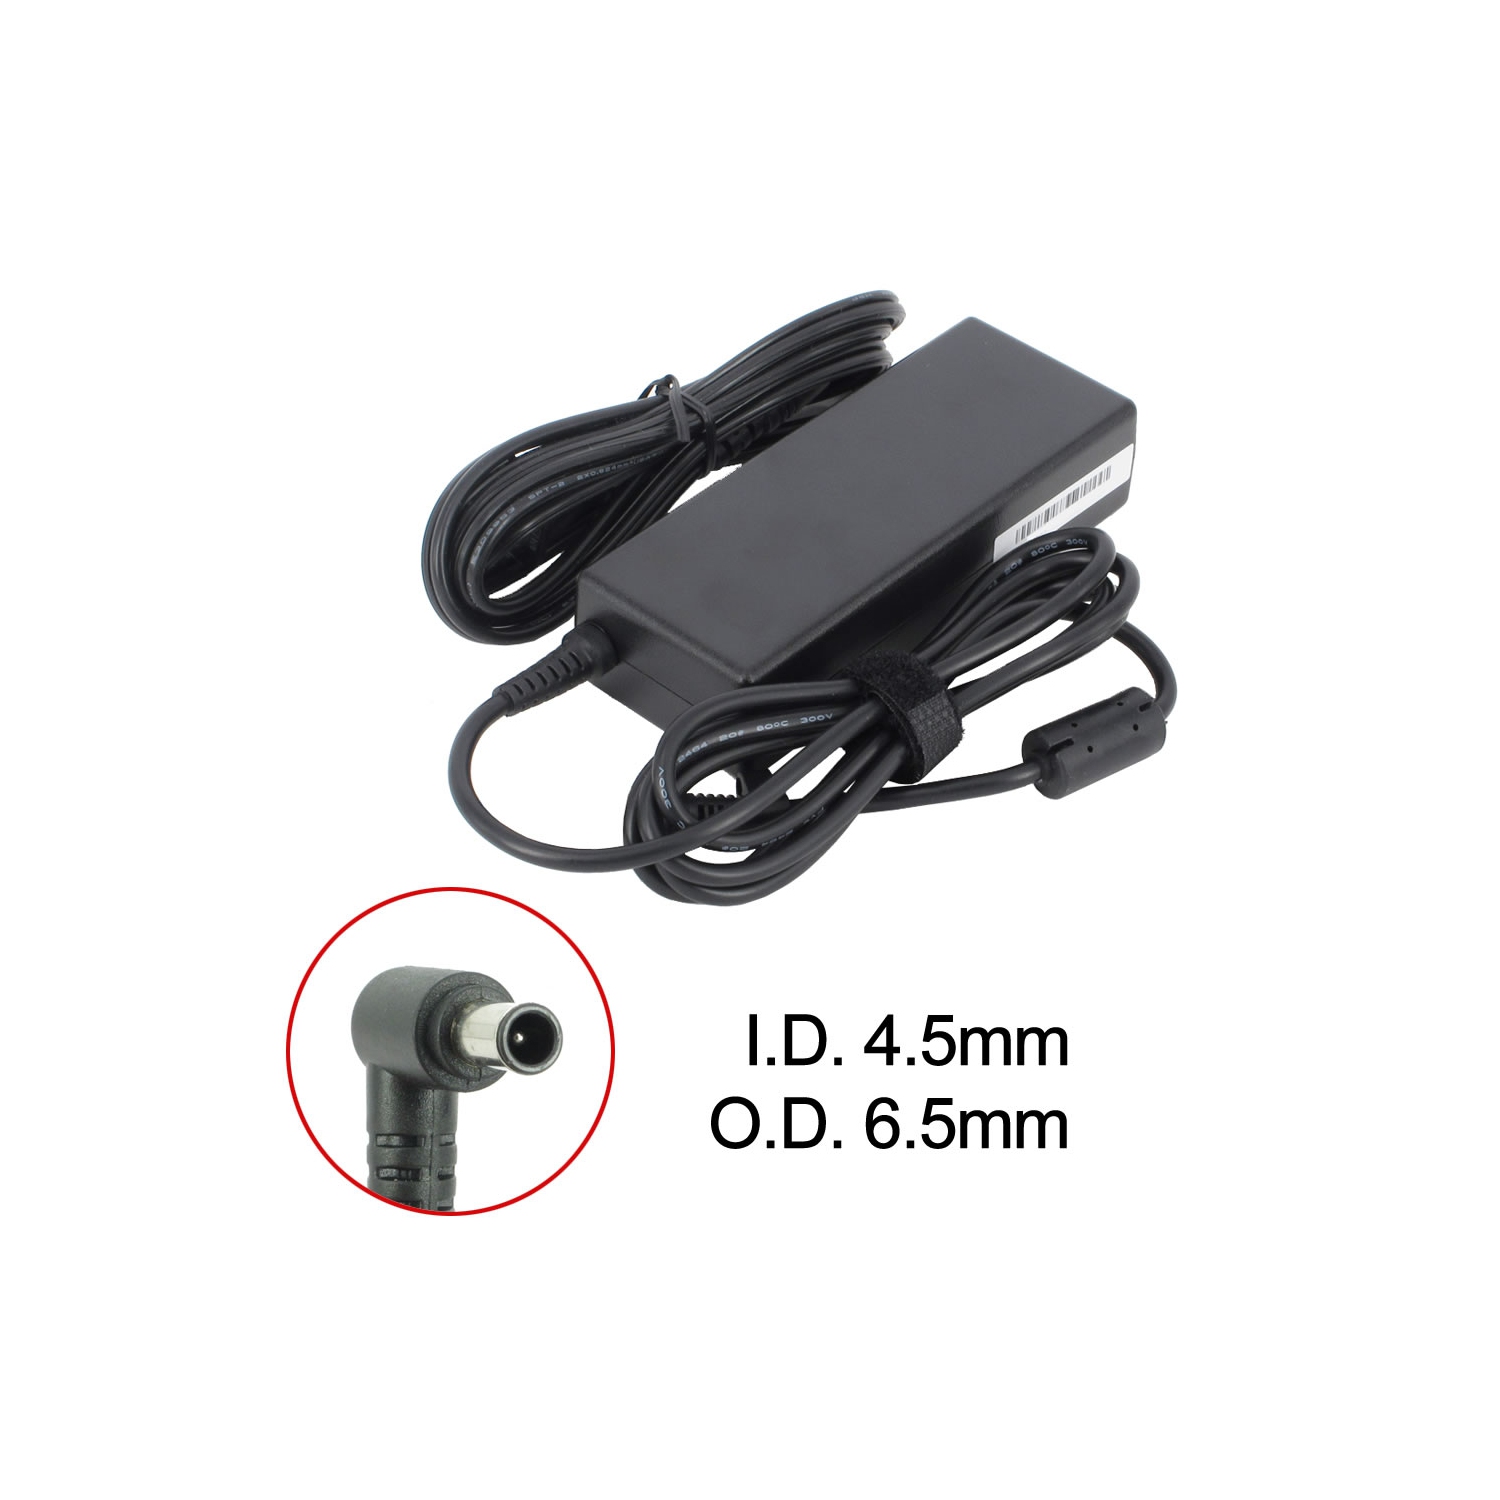 Brand New Laptop AC Adapter for LG XNOTE T290, ADP-90TH A, PCGA-AC19V19, VGP-AC19V14, VGP-AC19V26, VGP-AC19V43